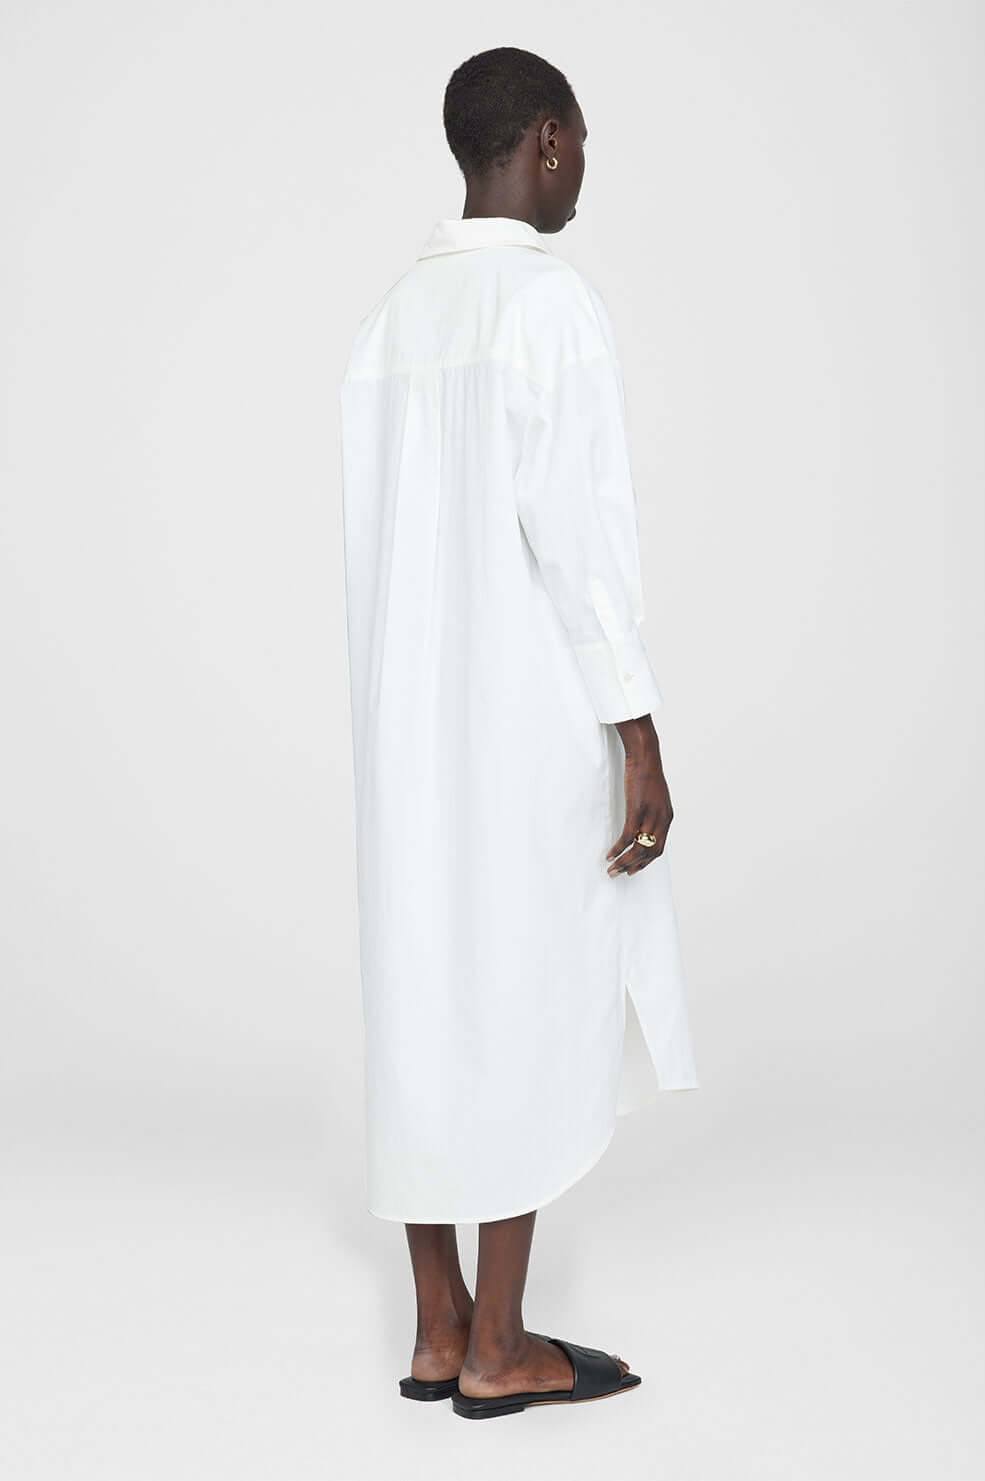 Anine Bing Mika Dress in White available at The New Trend